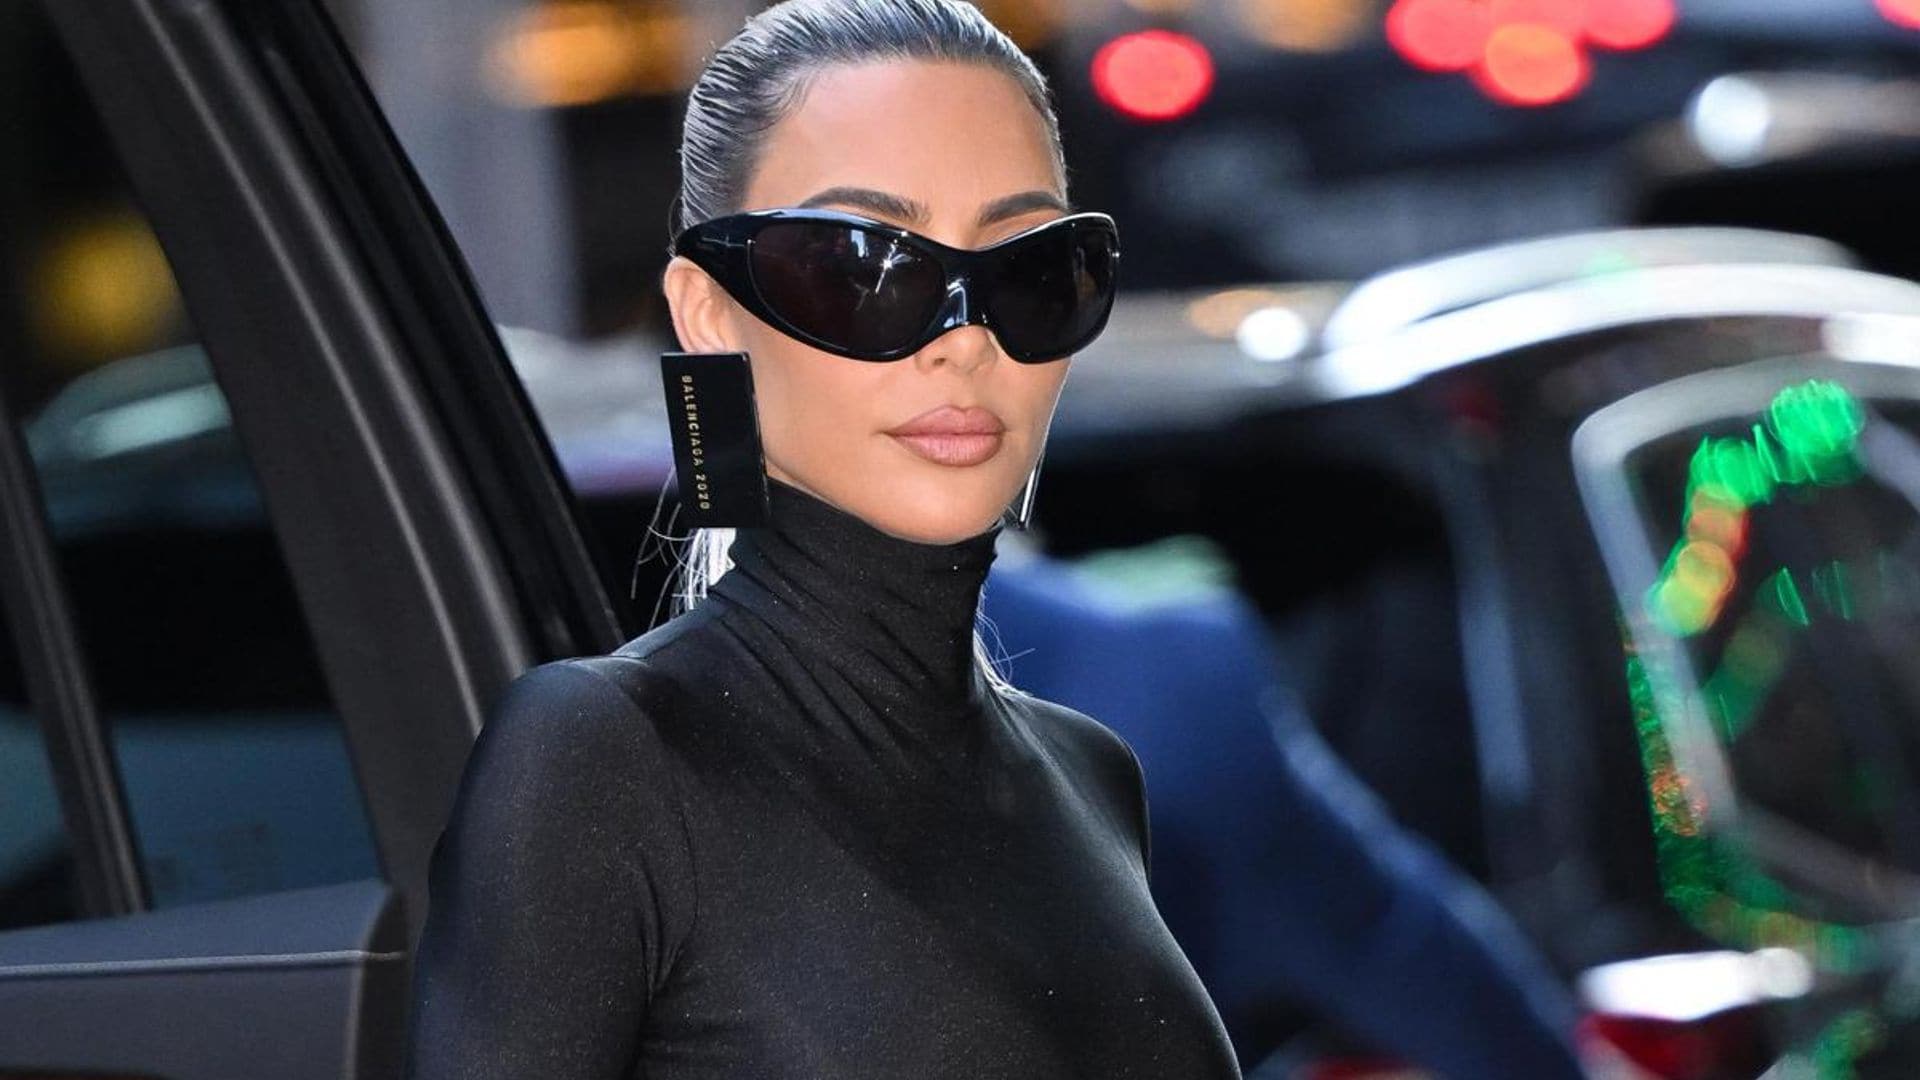 Kim Kardashian to be honored with the Giving Tree Award, after giving ‘millions’ in aid